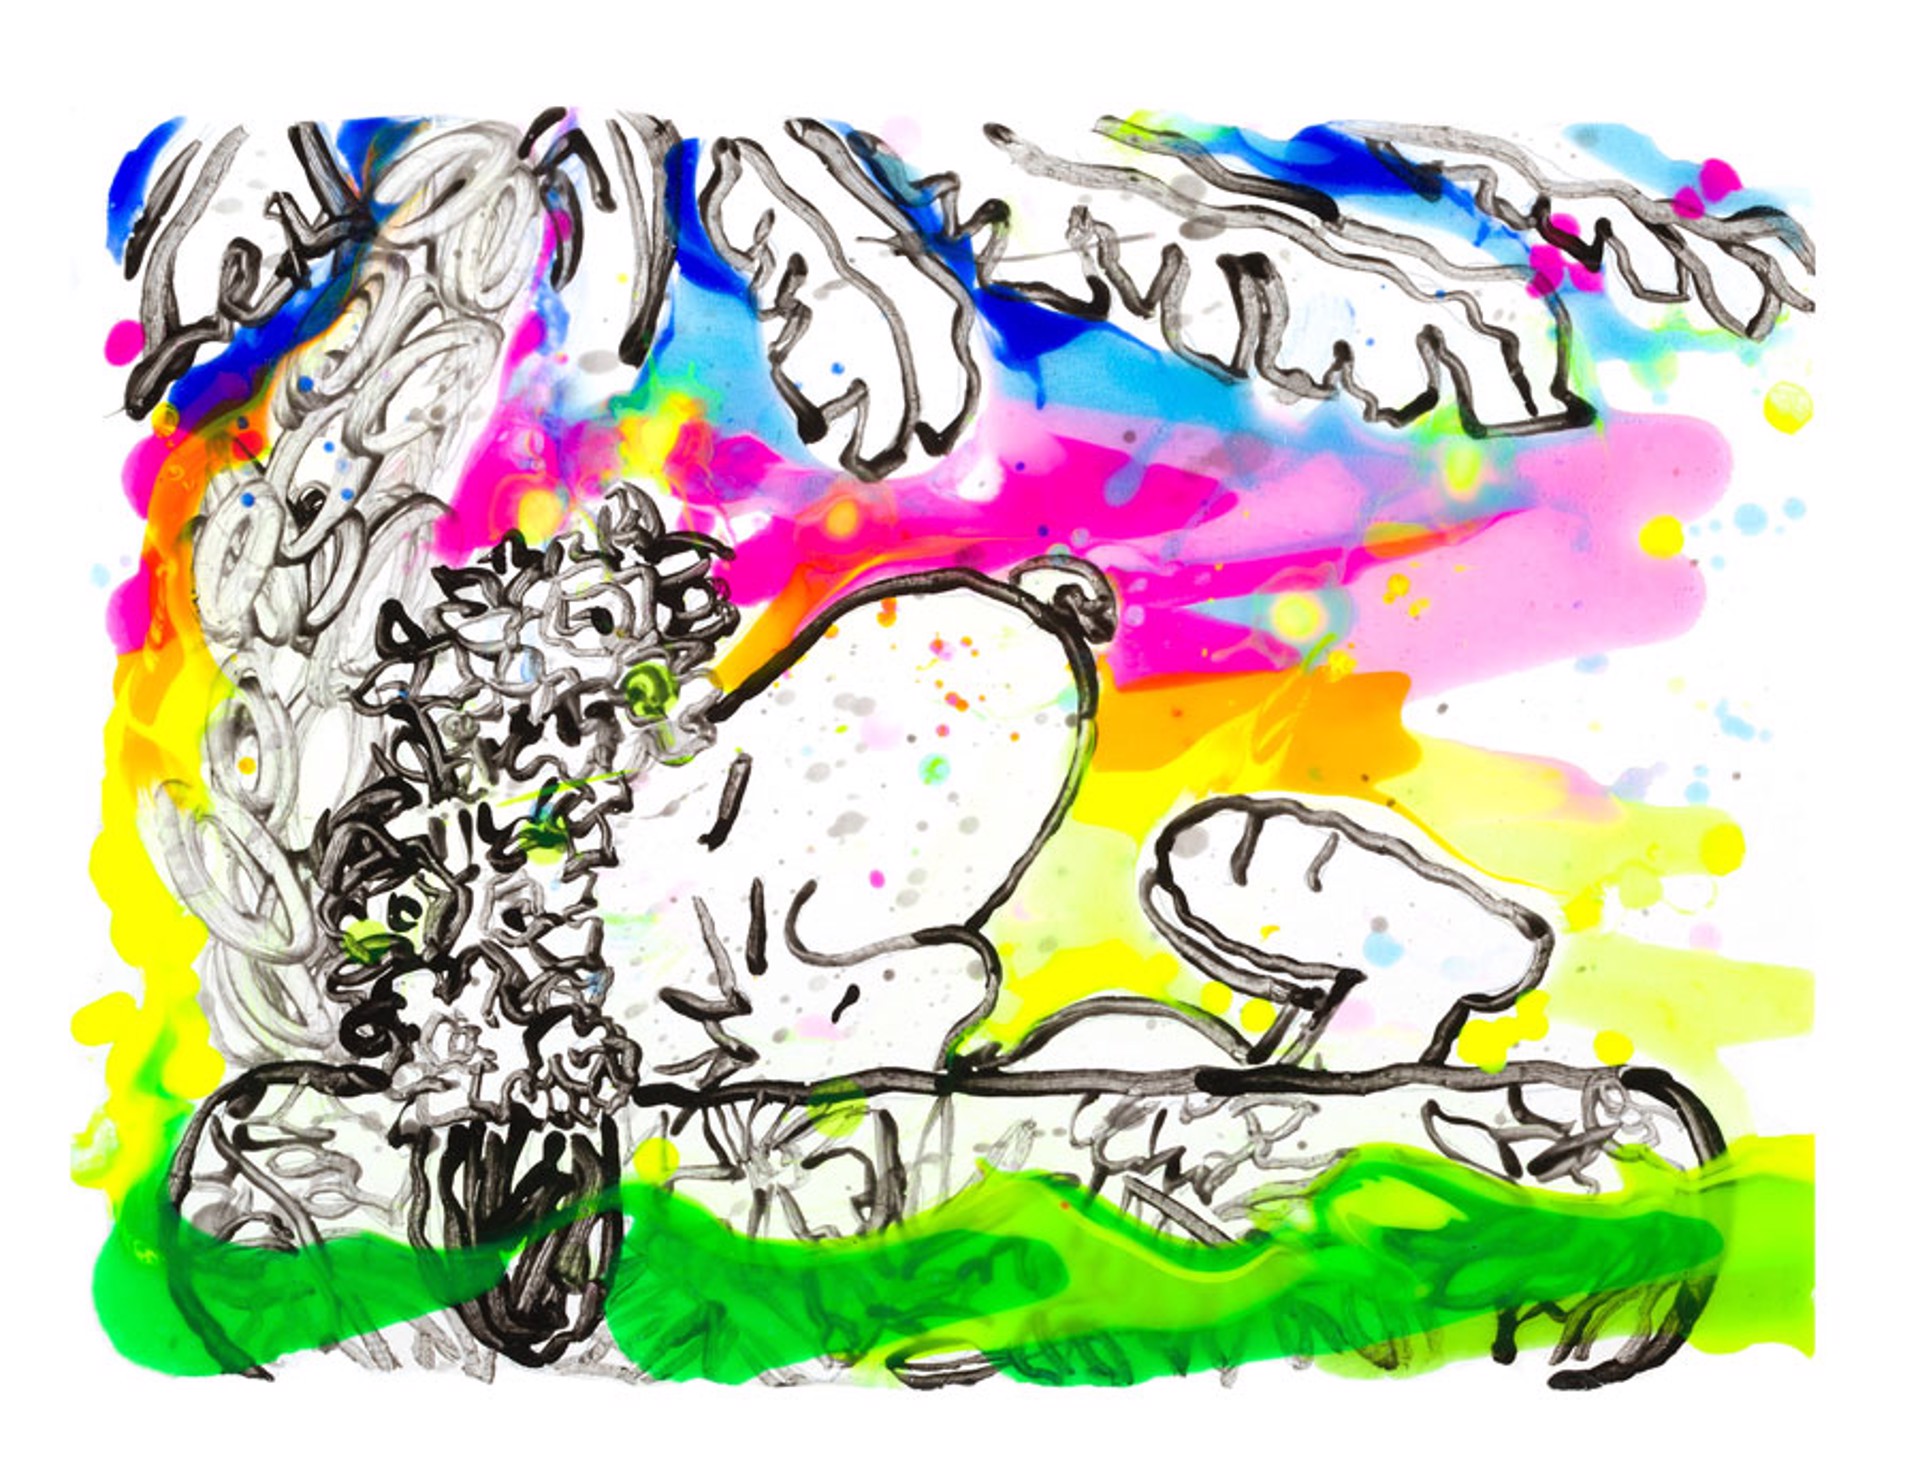 Beneath the Palms,The Symphony by Tom Everhart